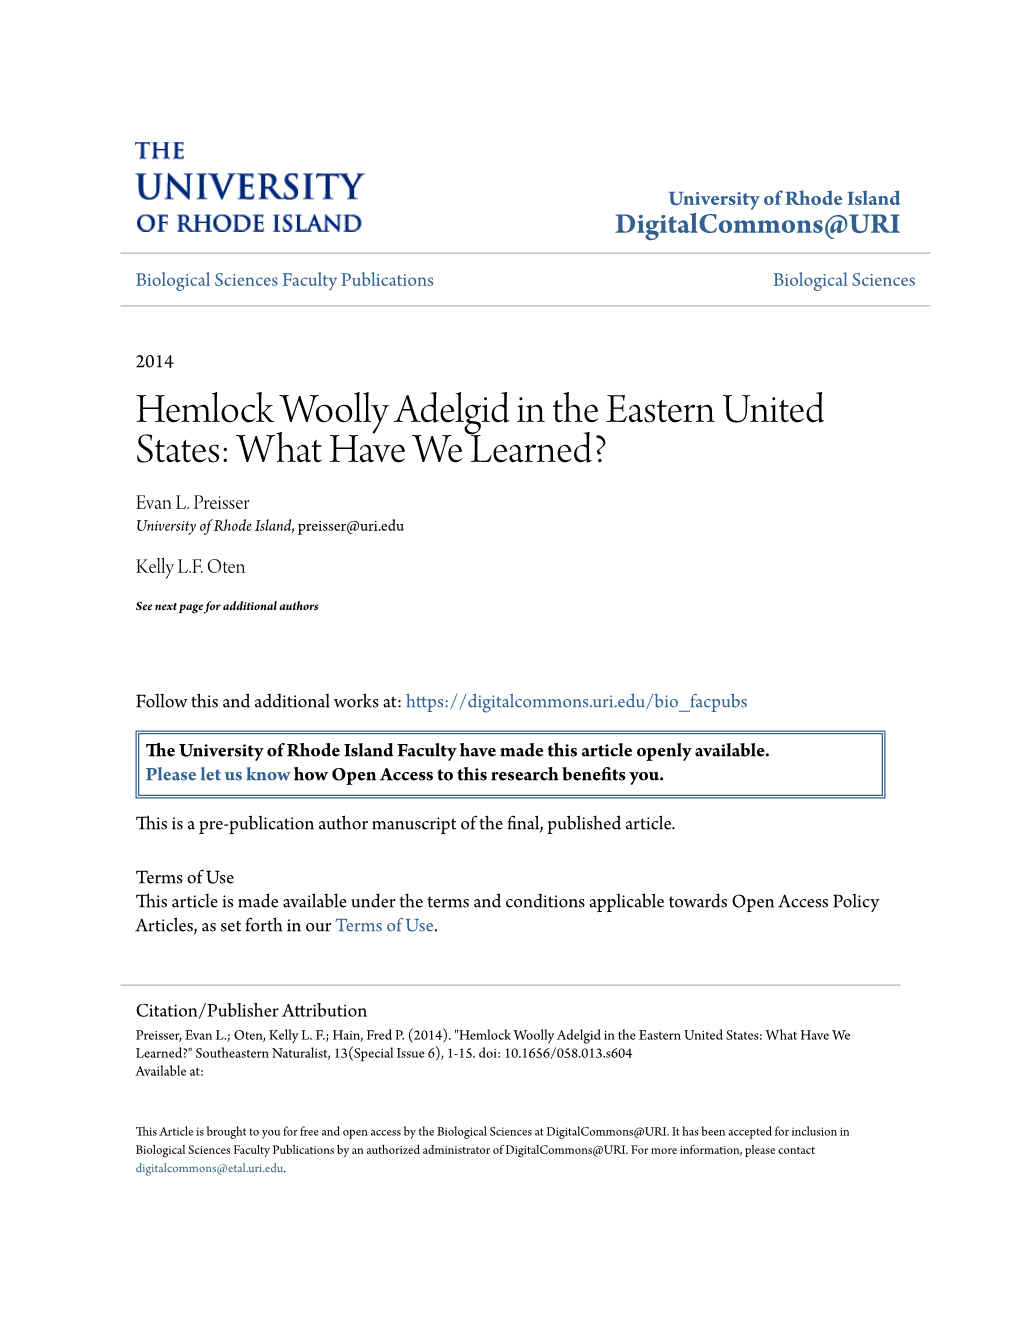 Hemlock Woolly Adelgid in the Eastern United States: What Have We Learned? Evan L